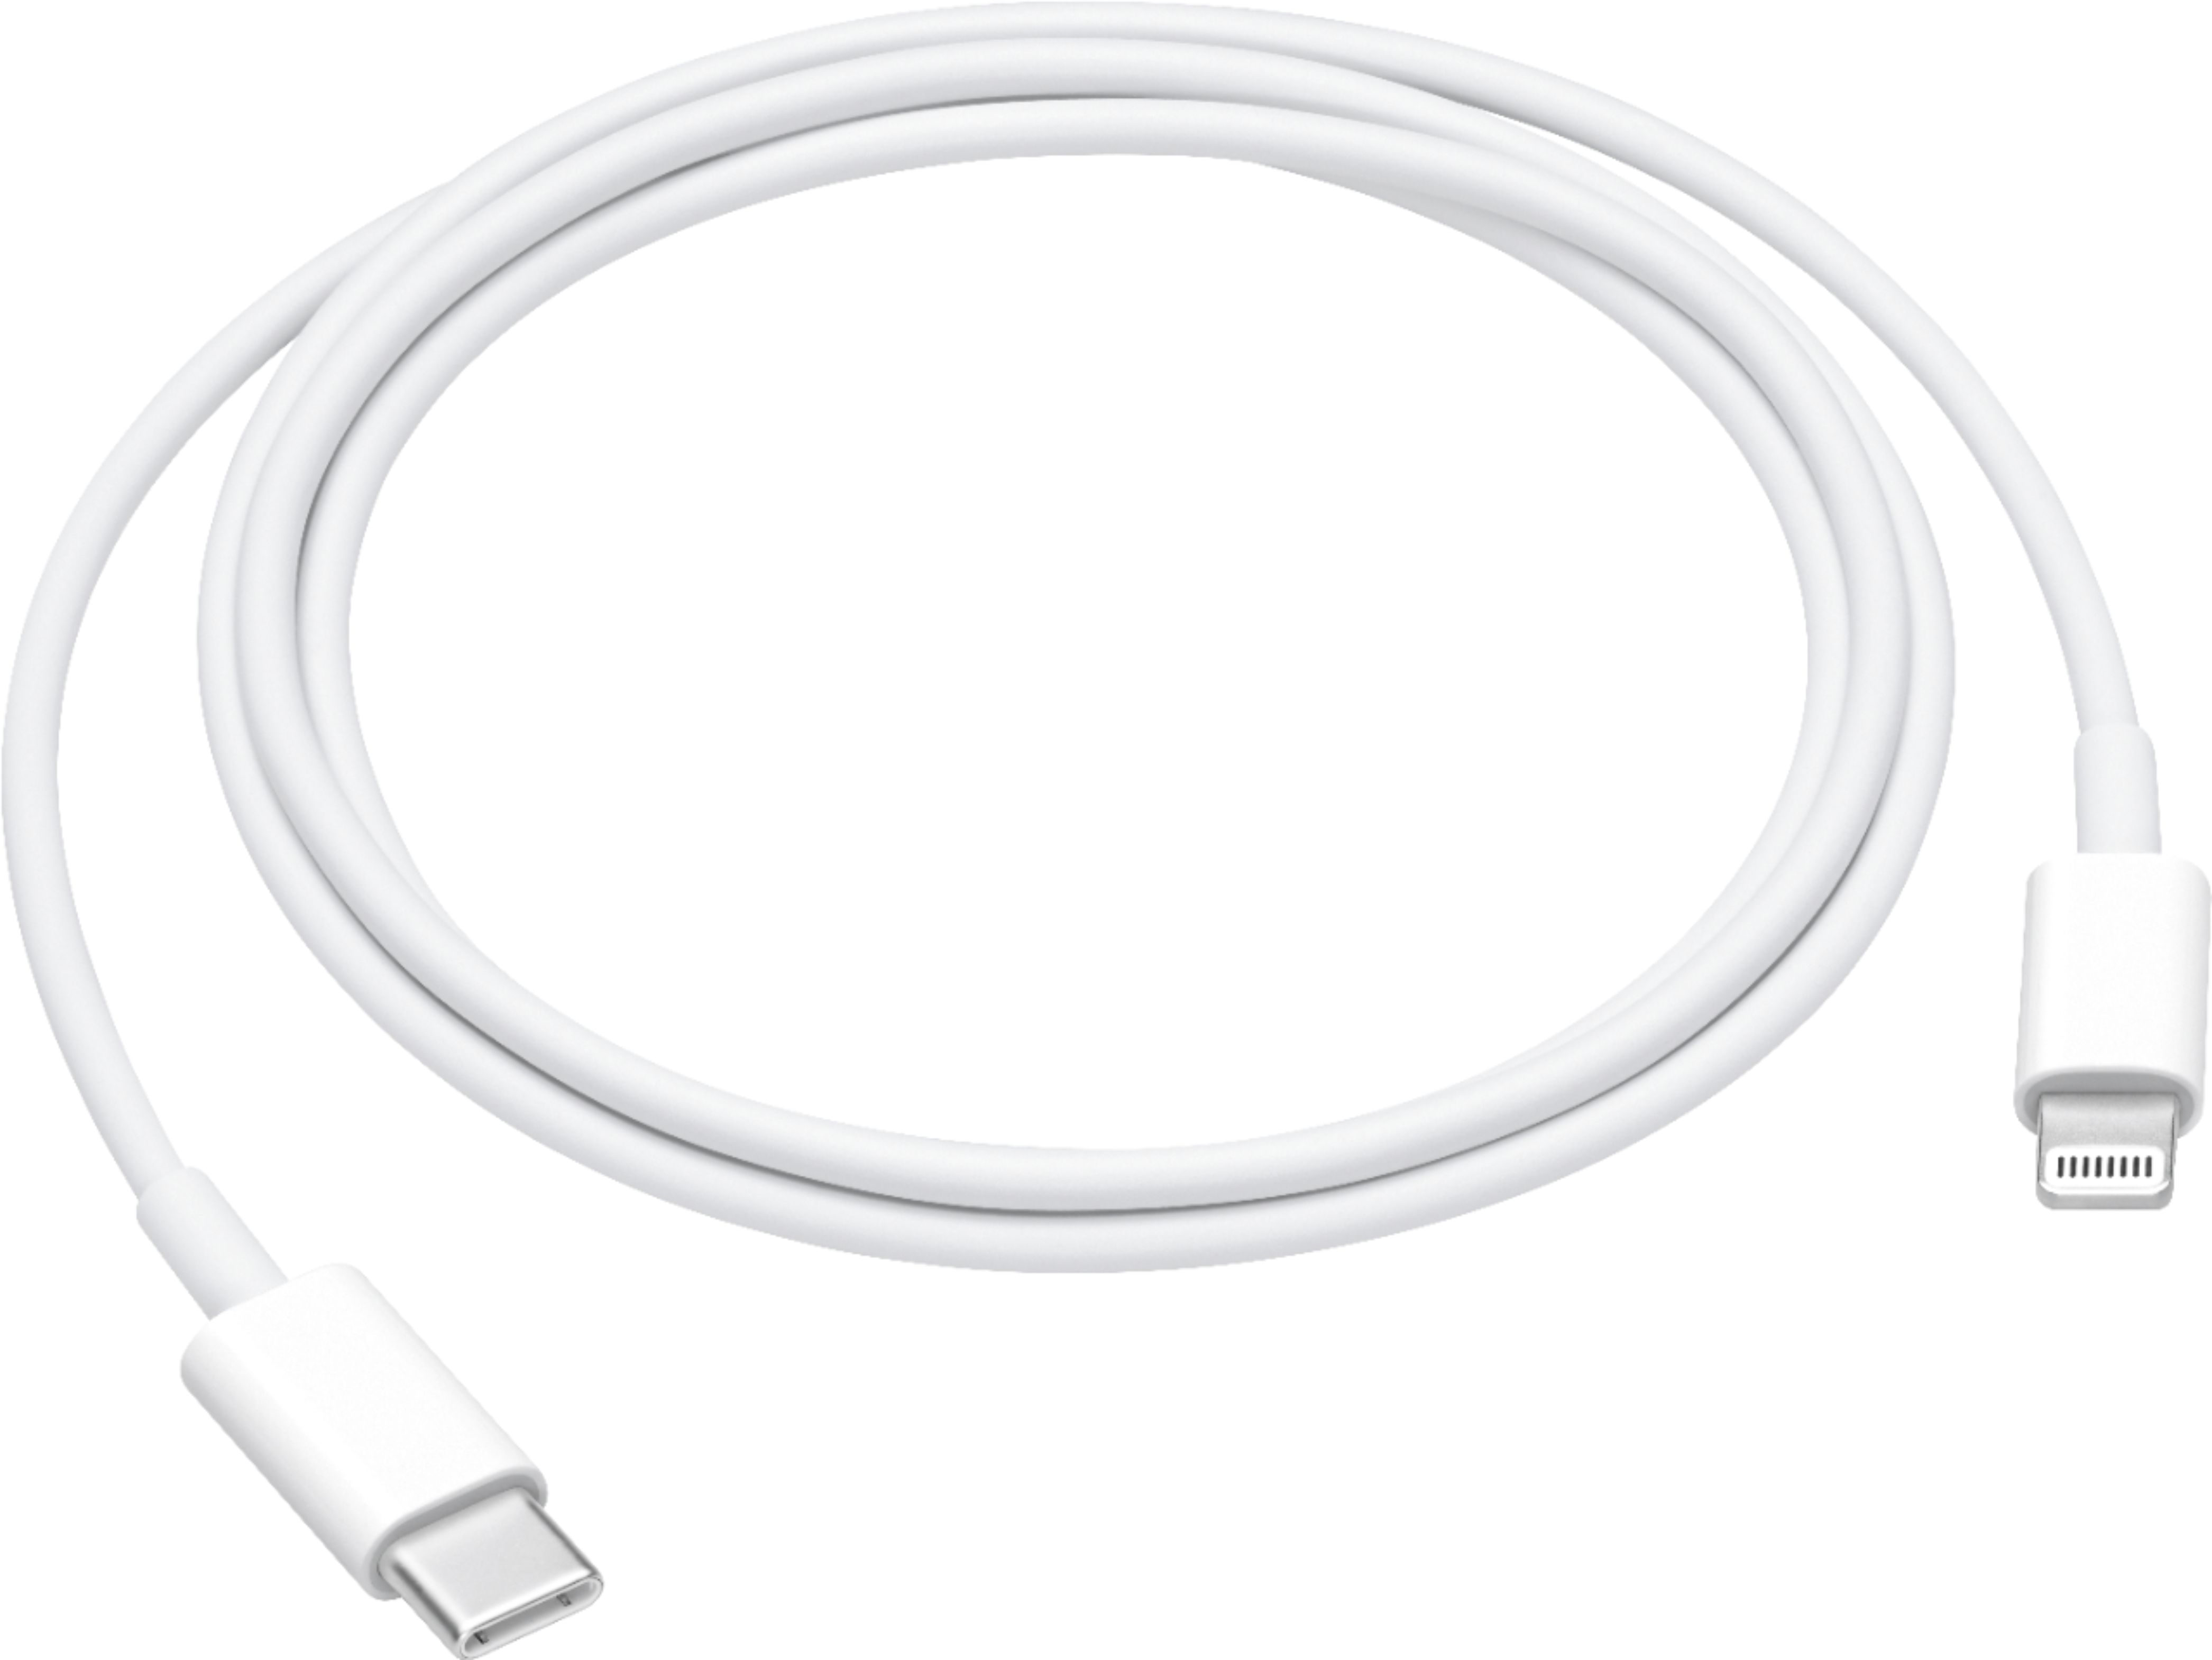 apple ipad charger - Best Buy